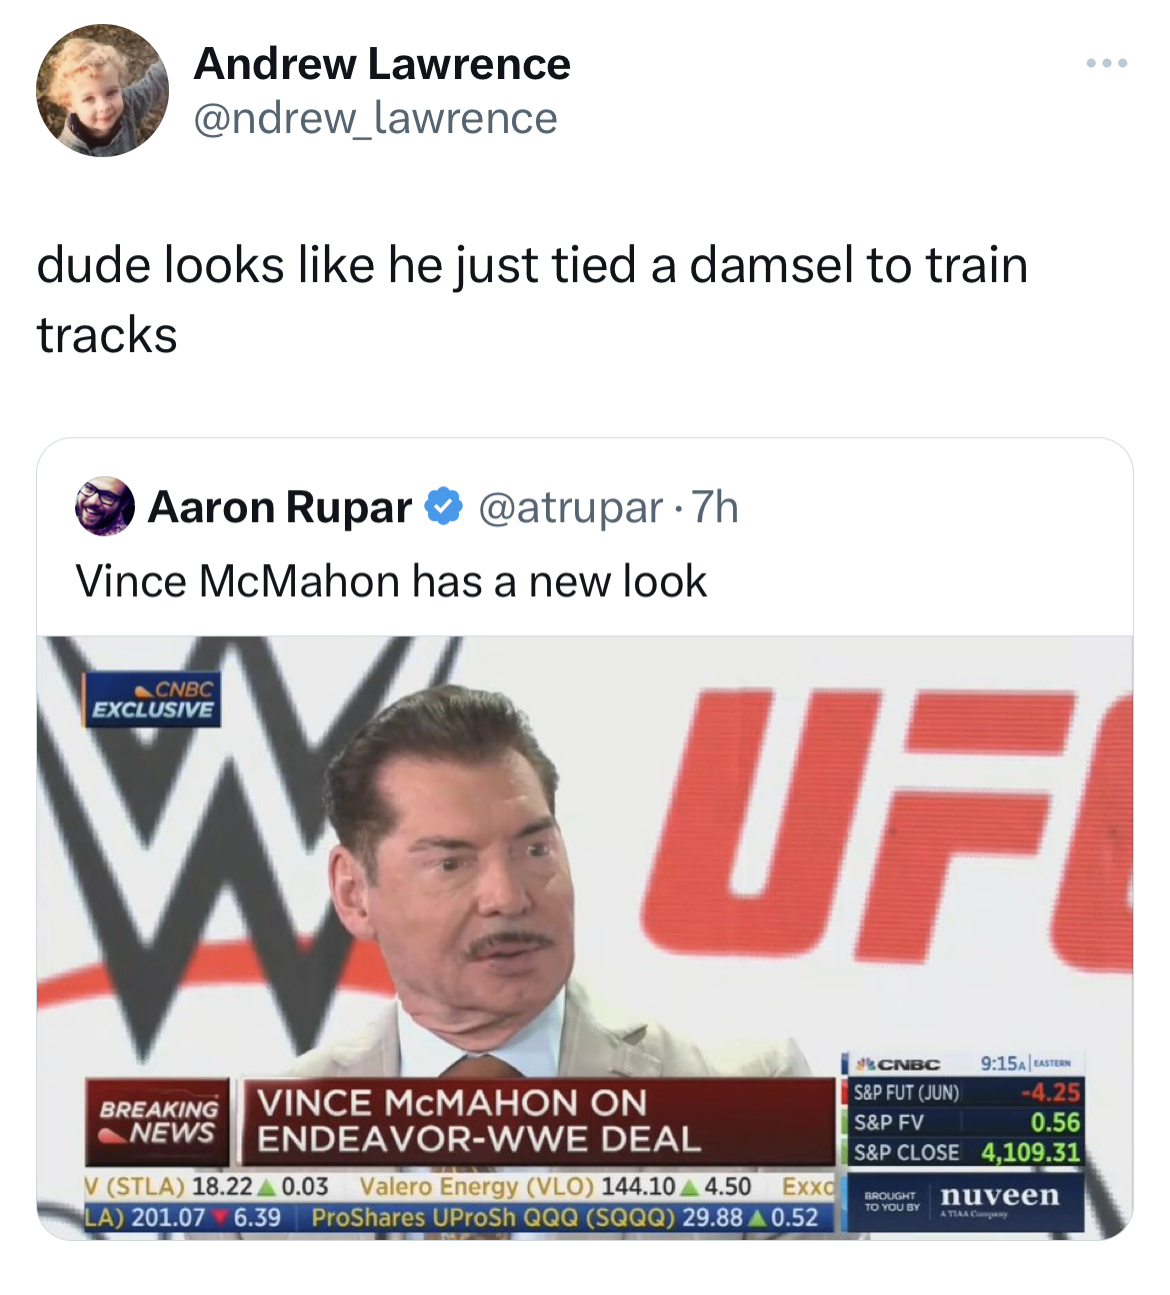 Vince McMahon Mustache memes - media - Andrew Lawrence dude looks he just tied a damsel to train tracks Aaron Rupar Vince McMahon has a new look Exclusive Uf Breaking Vince Mcmahon On News EndeavorWwe Deal V Stla 18.220.03 Valero Energy Vlo 144.10 4.50 Ex